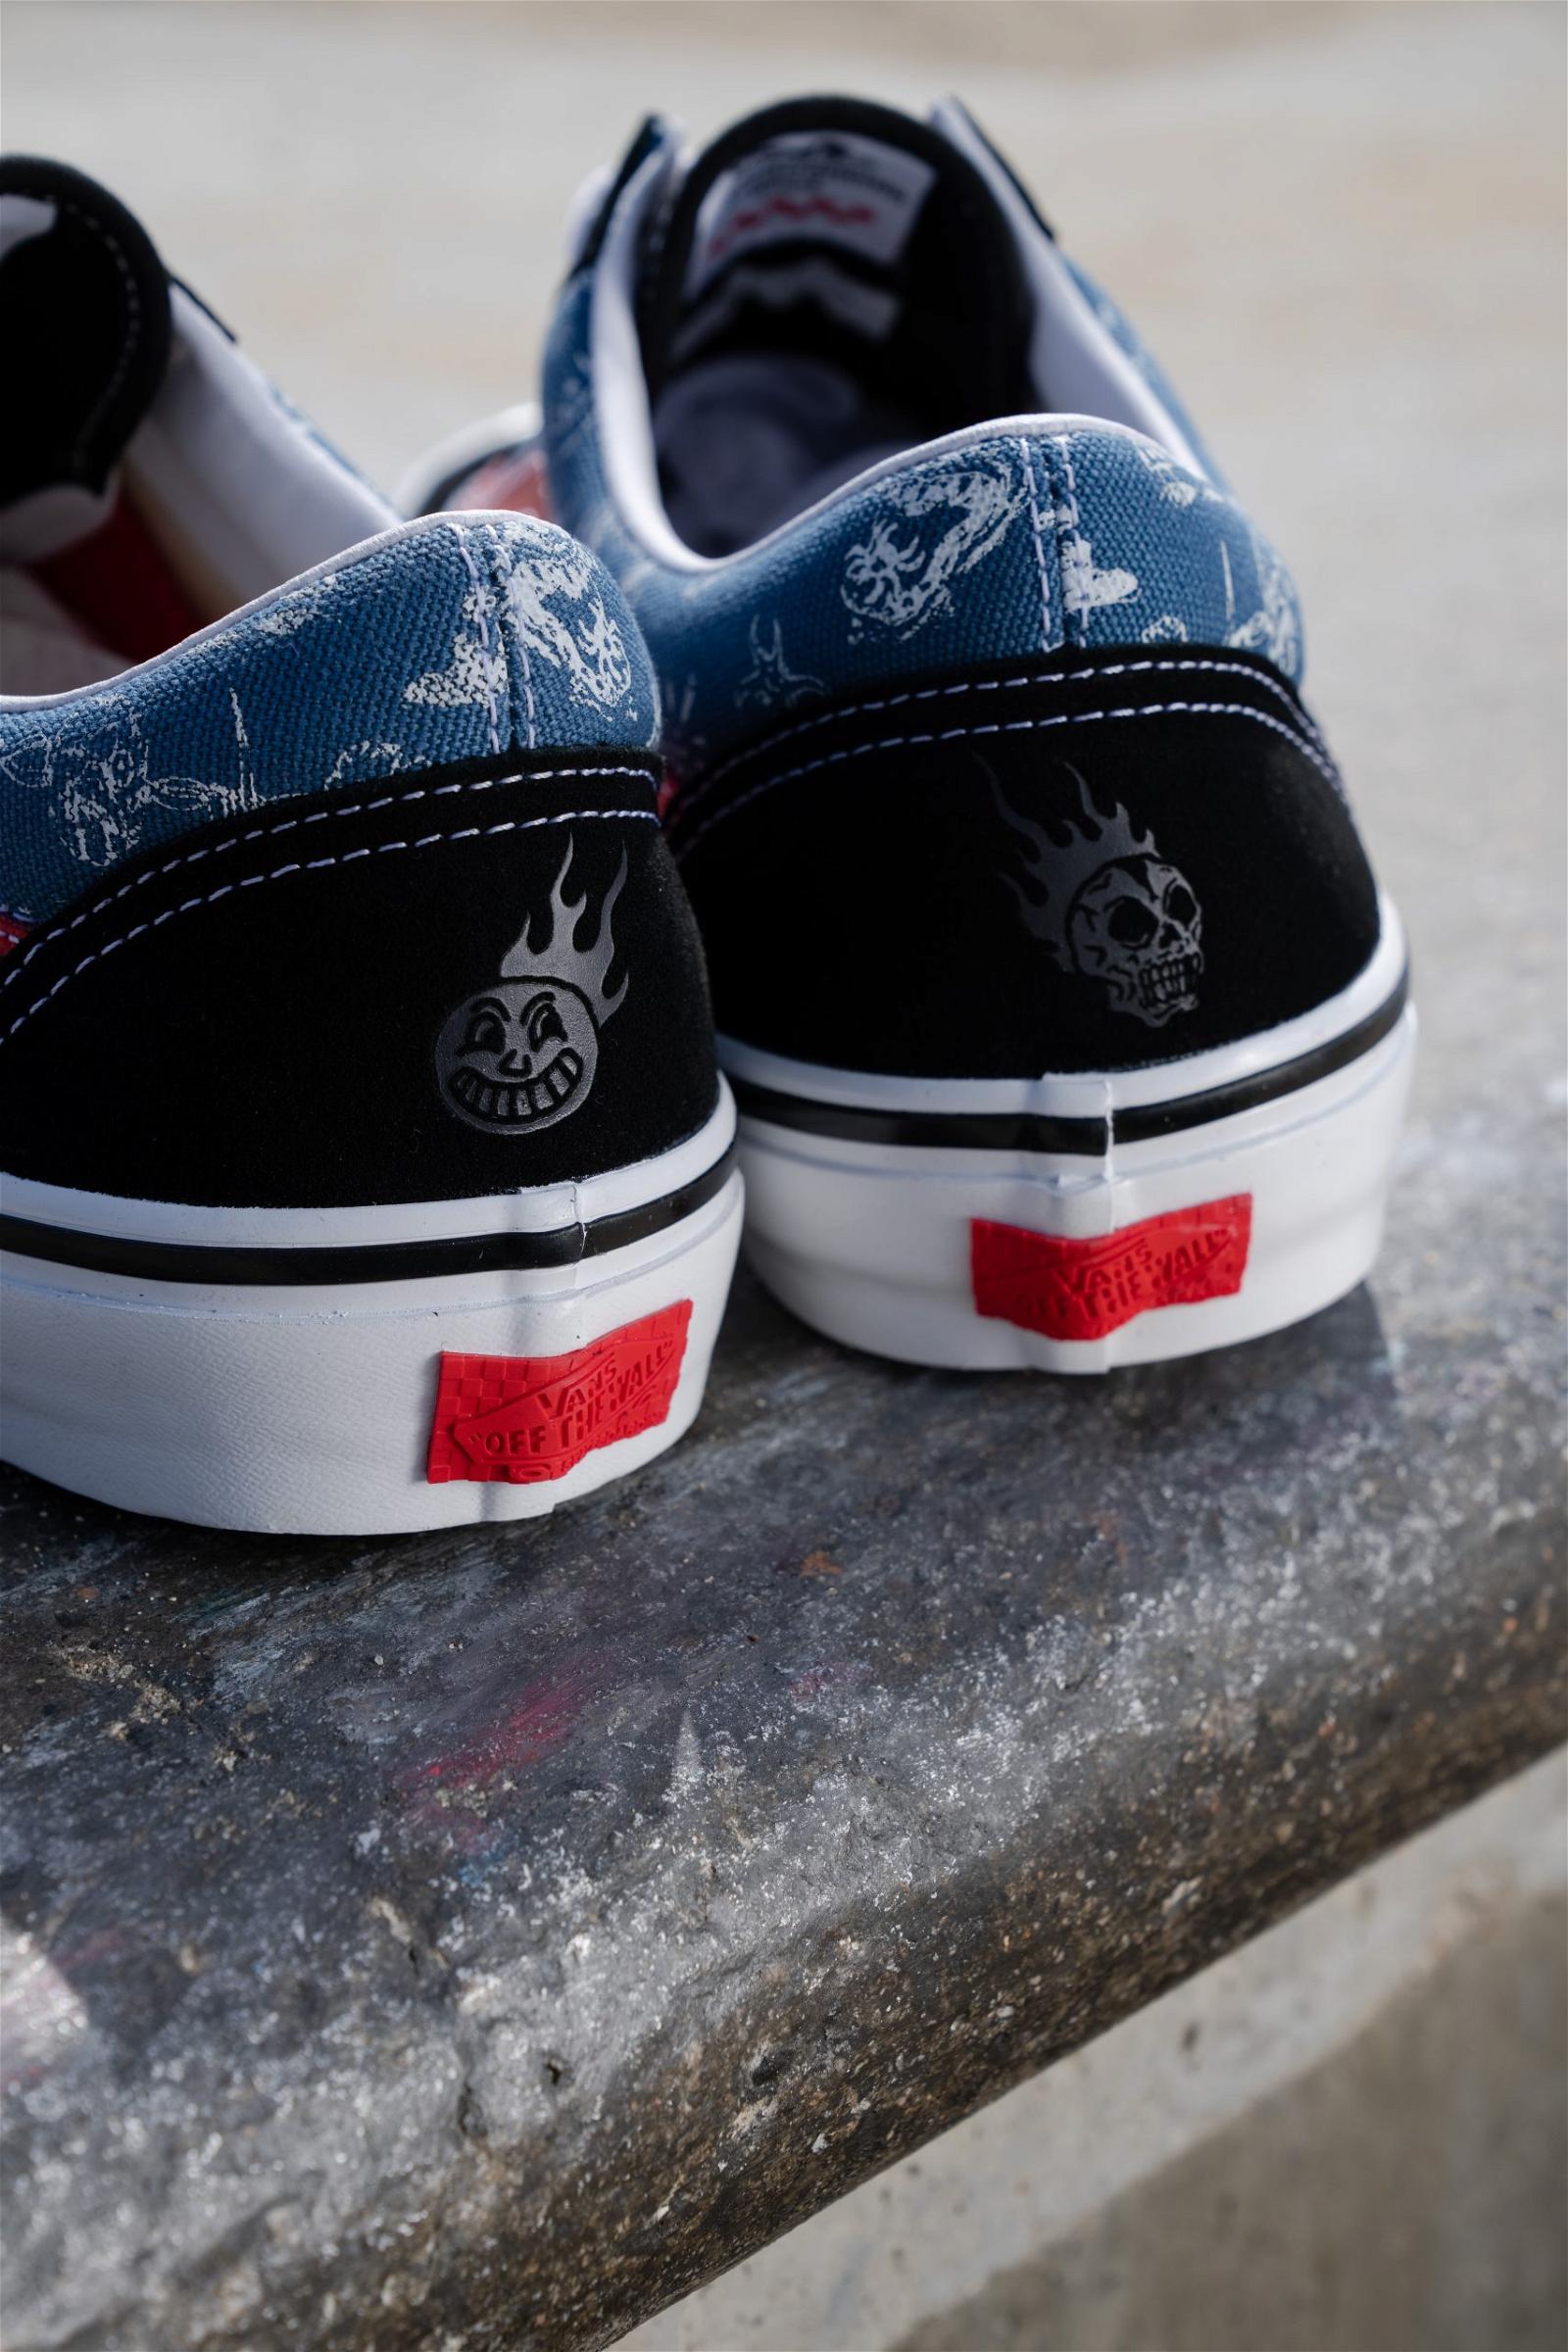 Vans x Mike Gigliotti collection